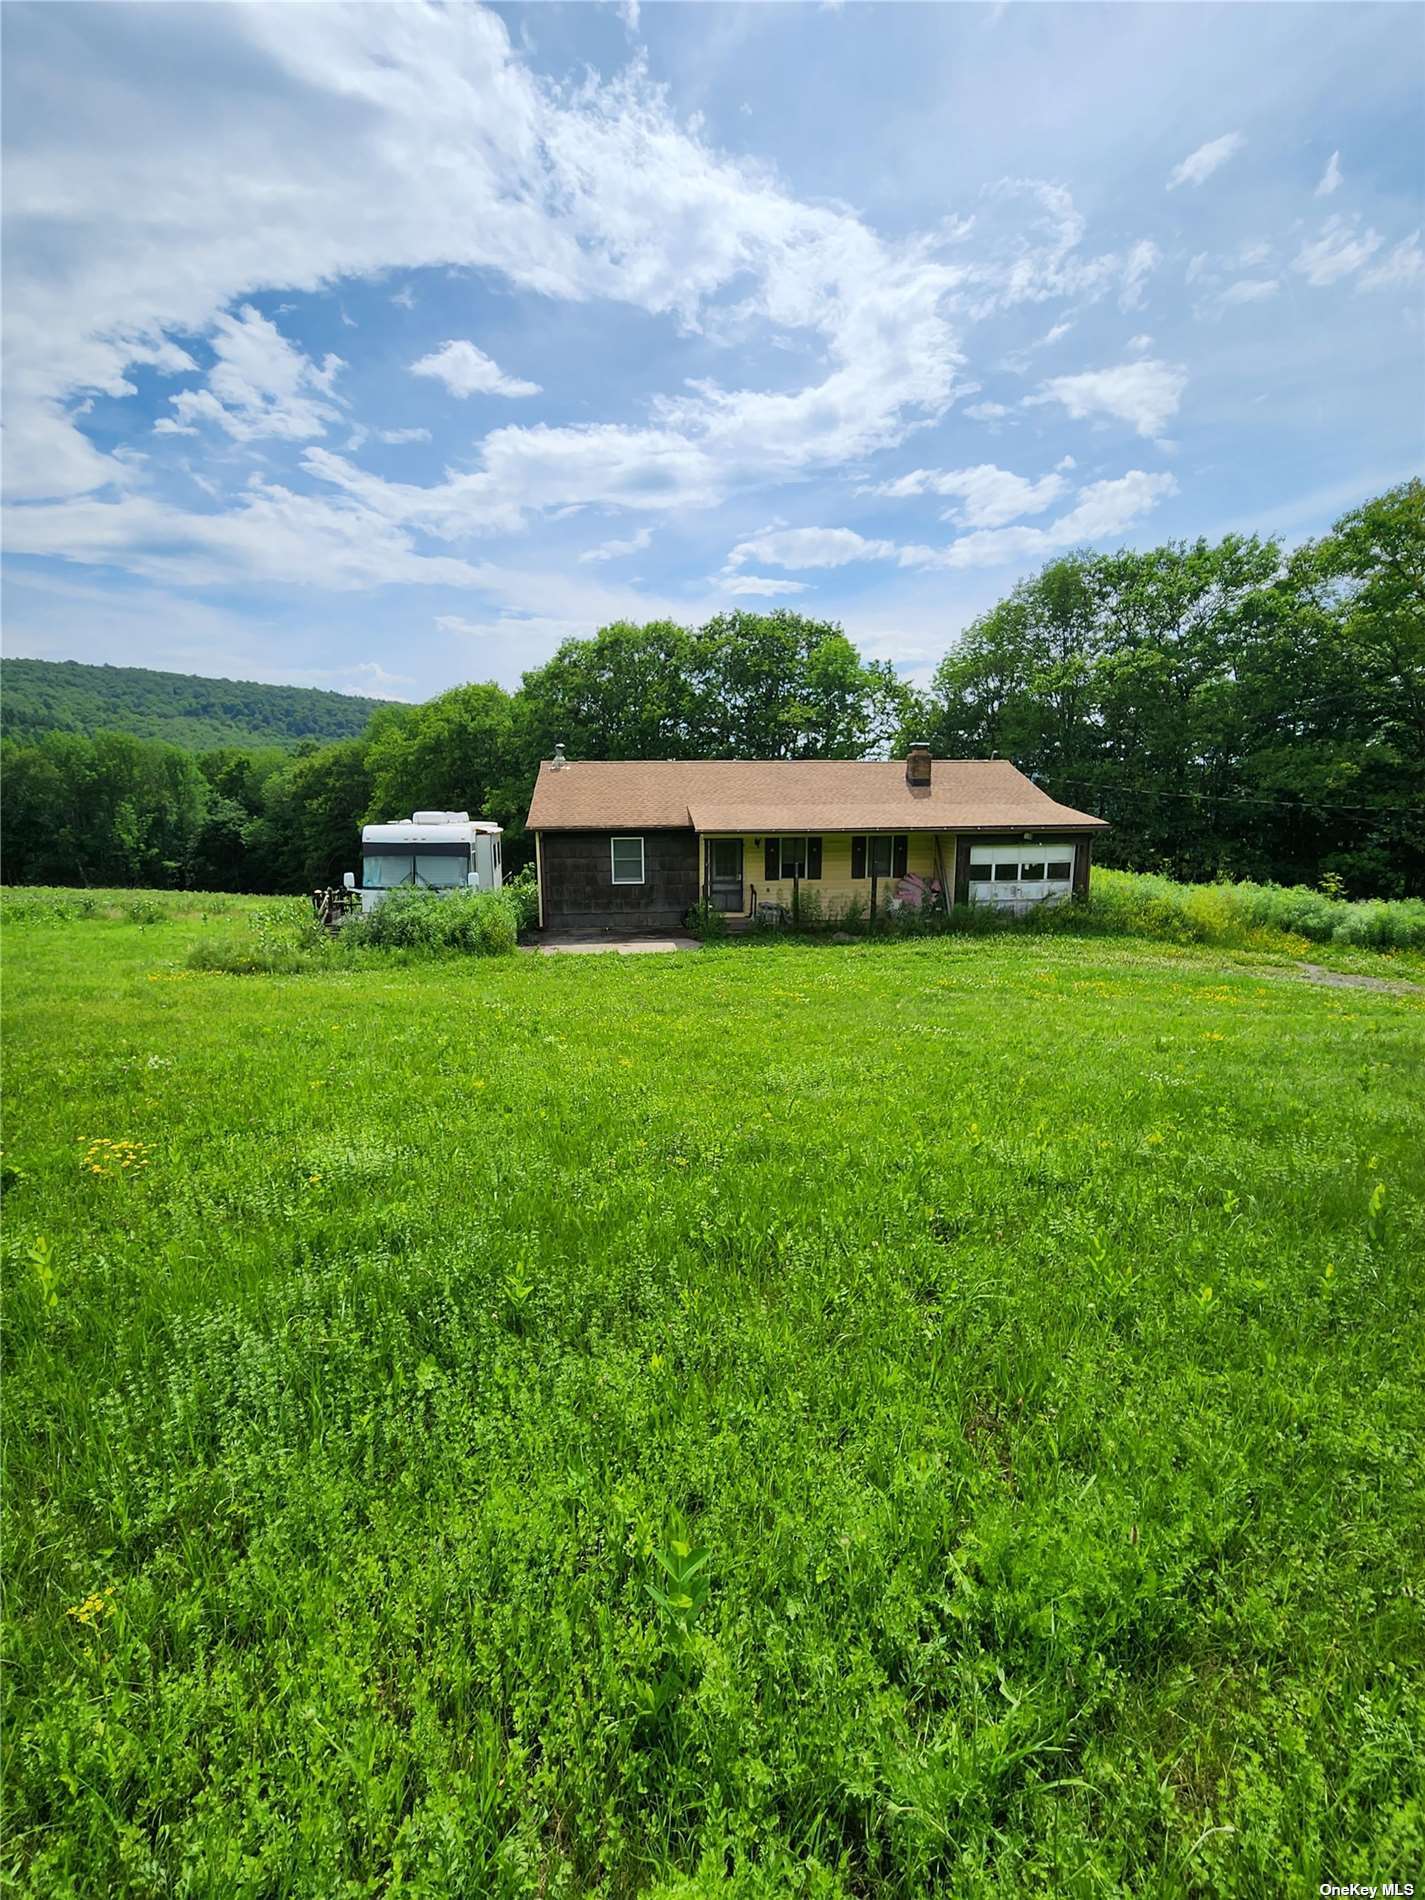 Single Family in Out Of Area Town - Country Hway 39  Out Of Area, NY 12197